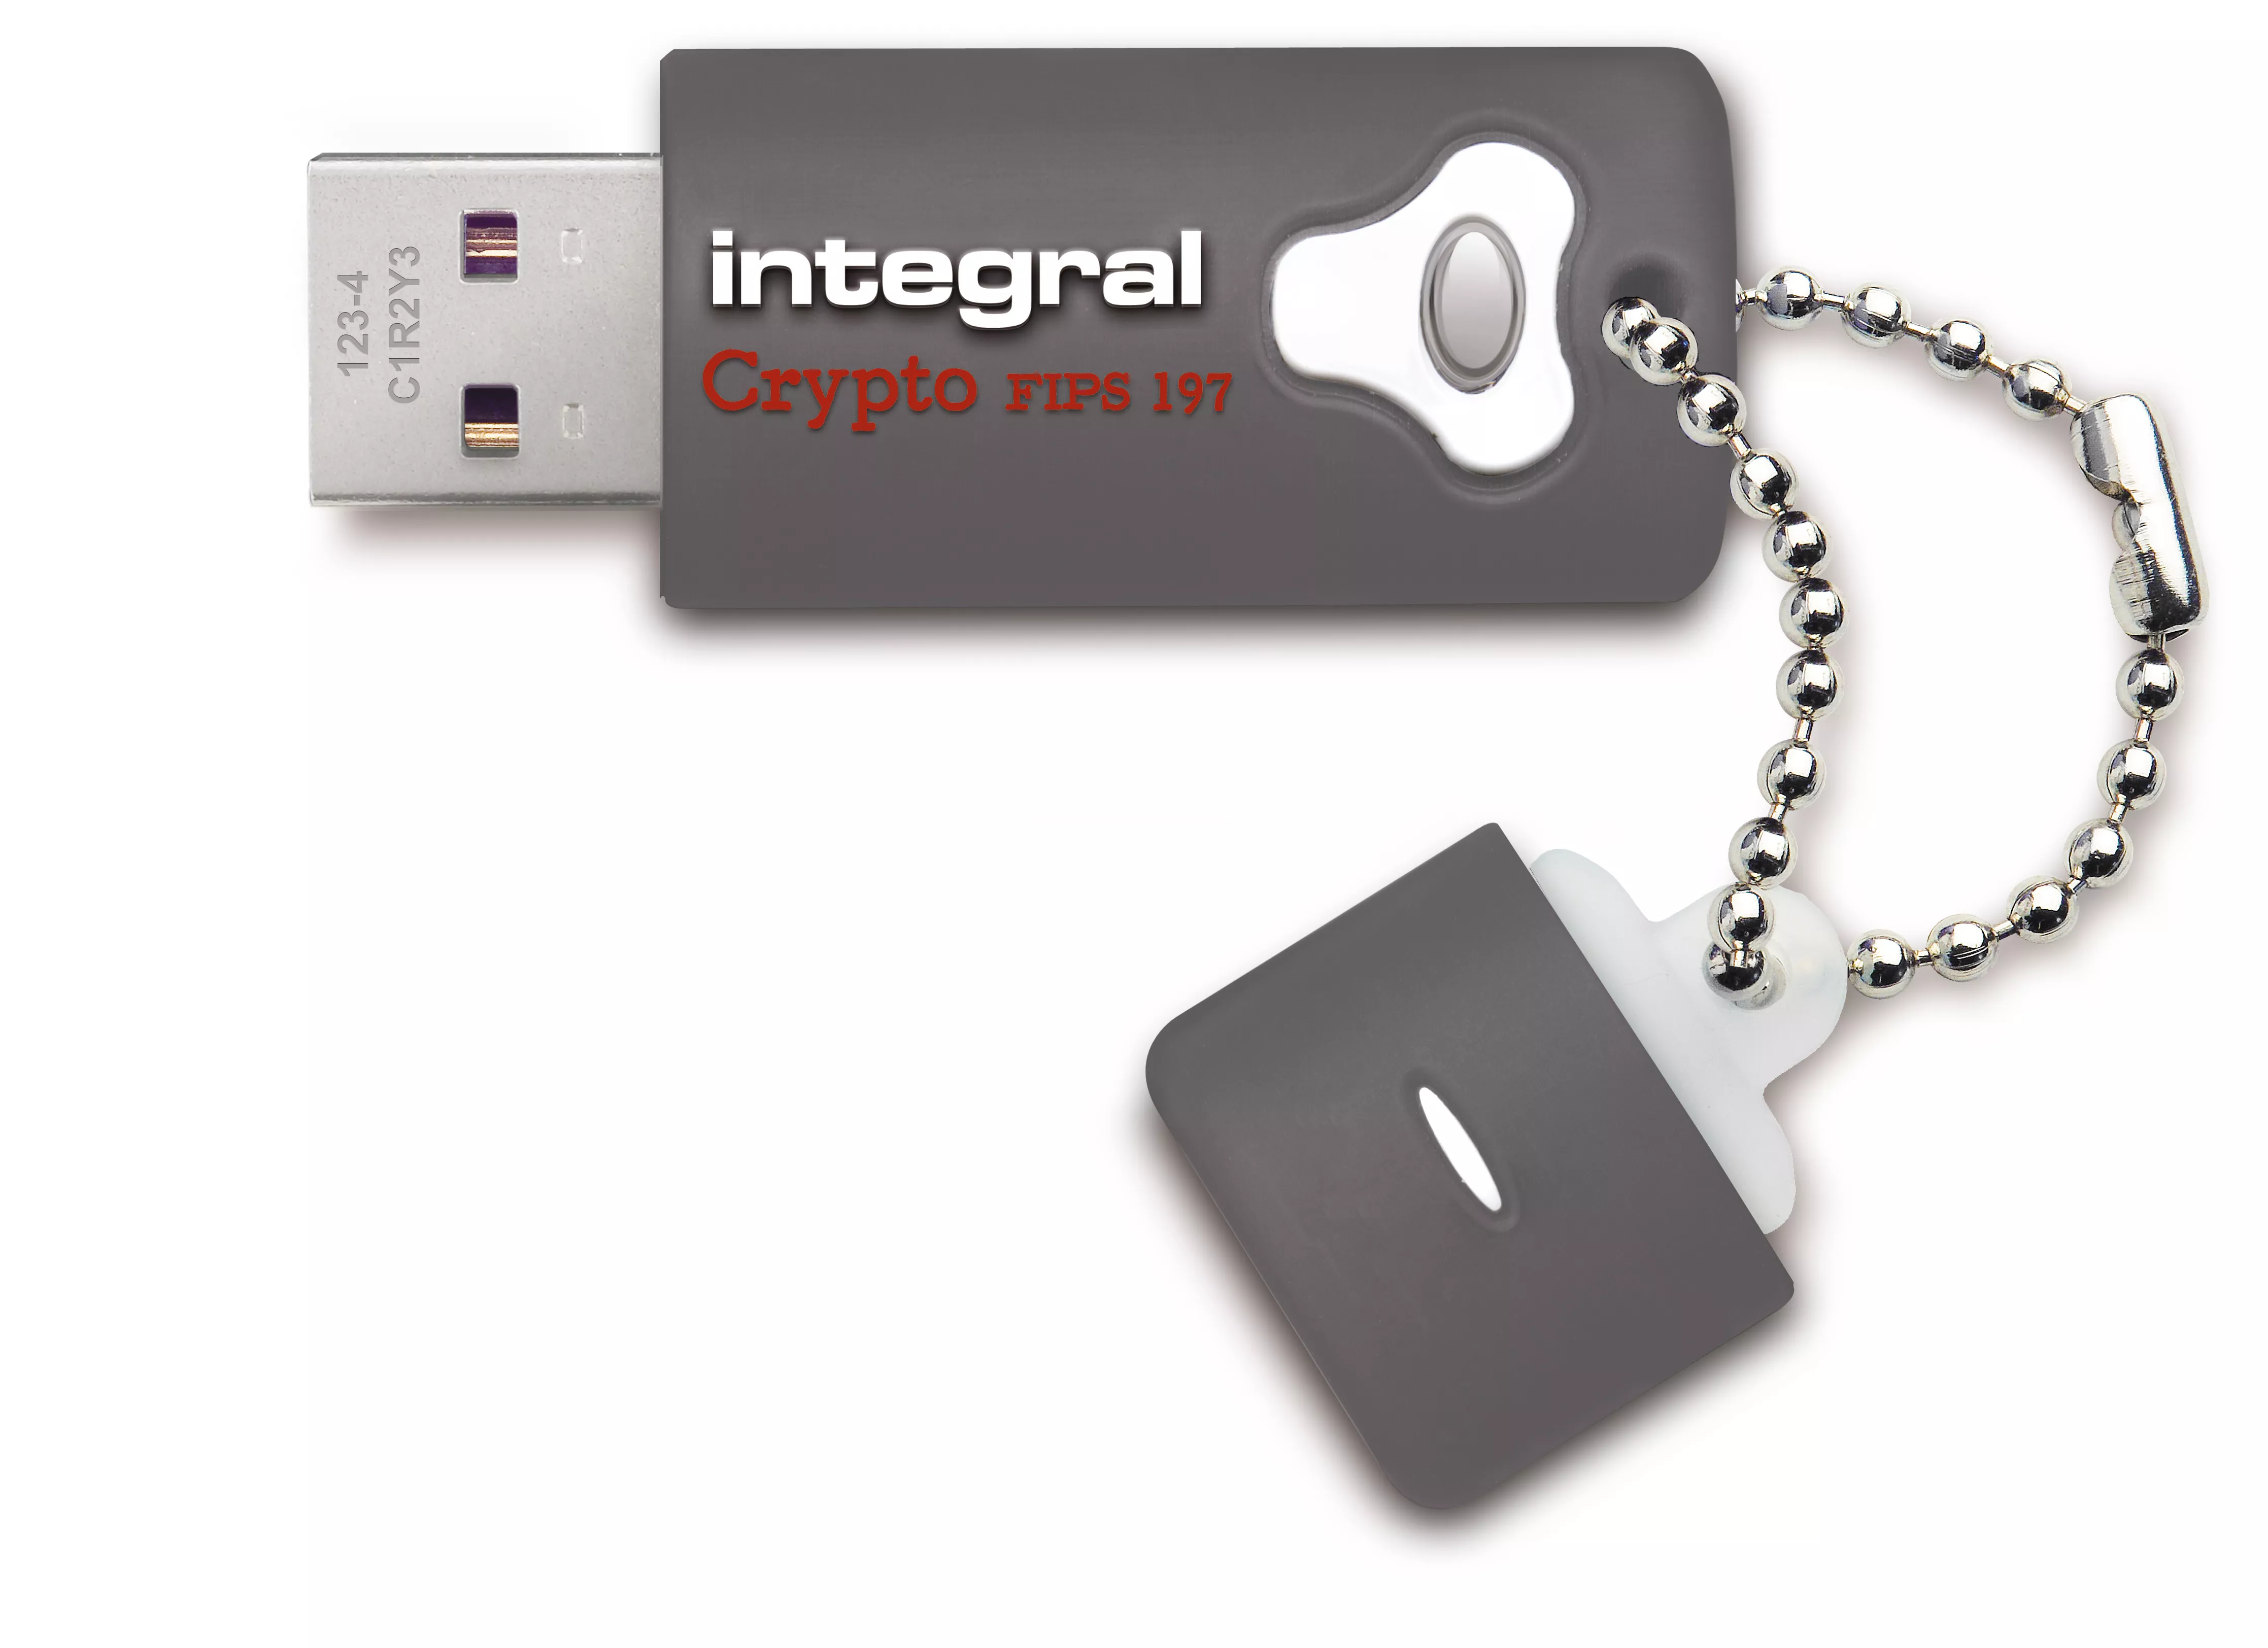 Achat Integral 4GB Crypto Drive FIPS 197 Encrypted USB 3.0 - 5055288430259